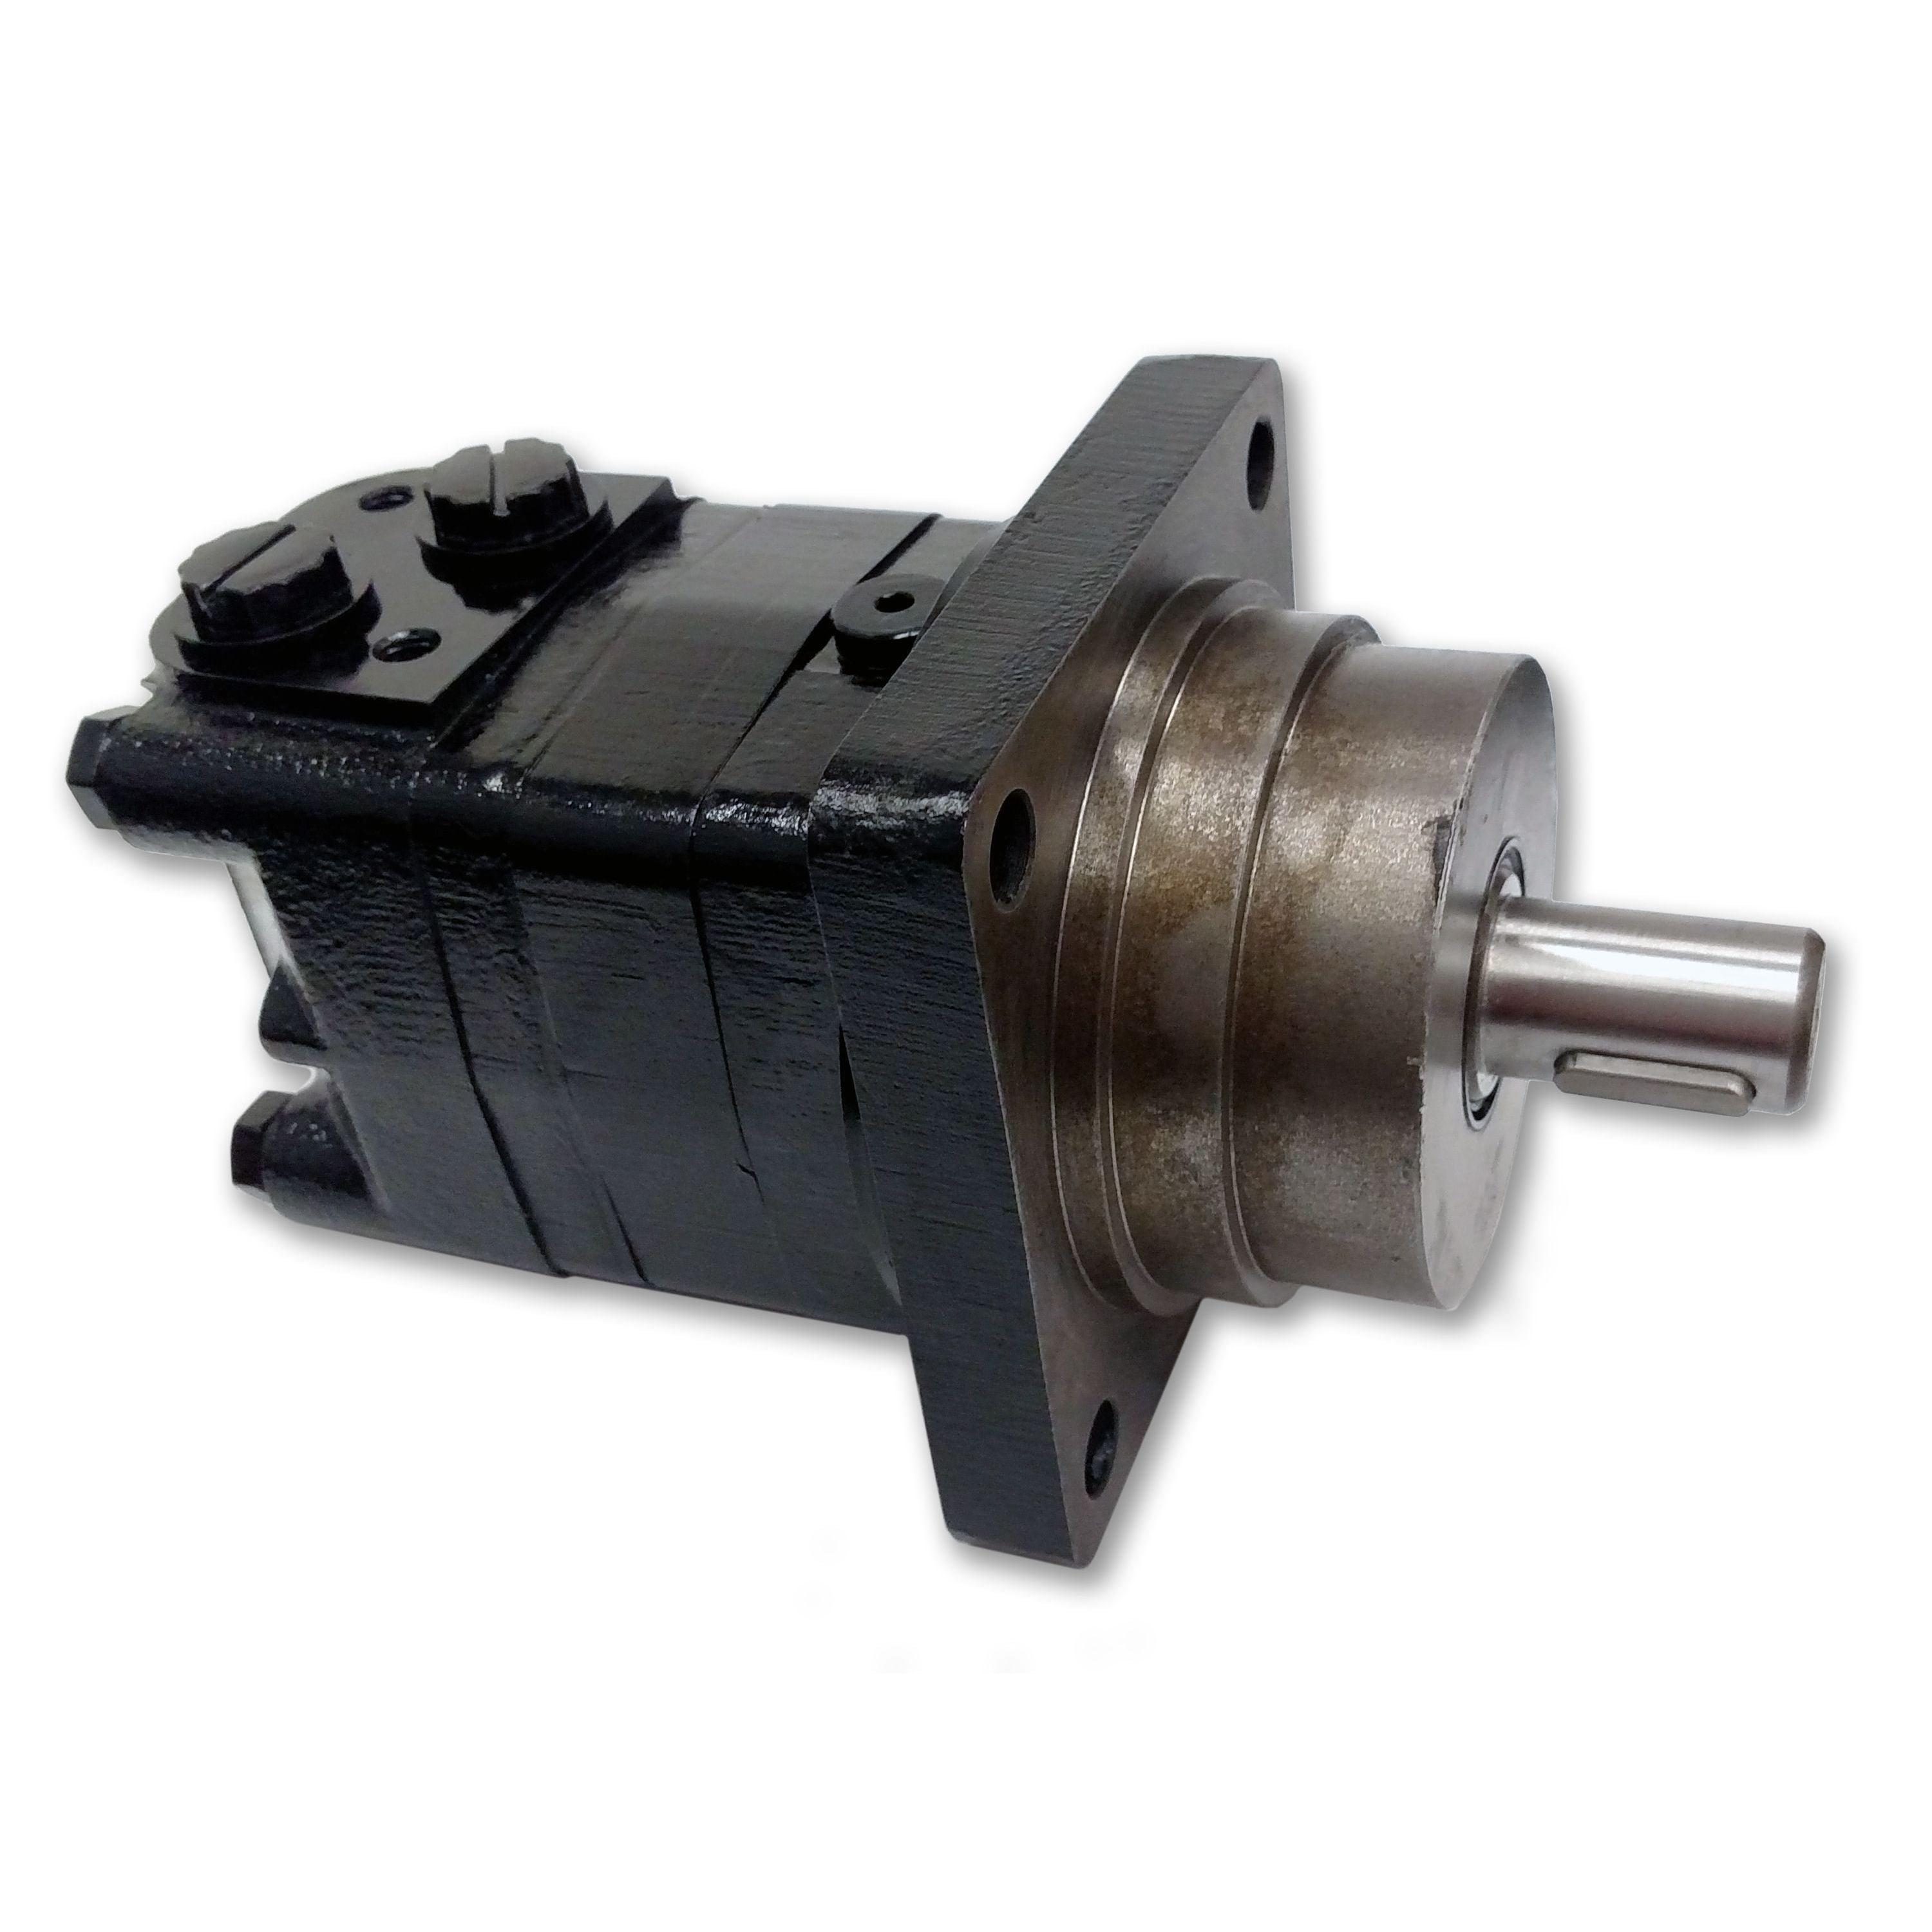 BMSY-400-WE-T4-S : Dynamic LSHT Motor, 394cc, 185RPM, 7786in-lb, 2320psi Differential, 19.81GPM, Wheel Mount, 1.25" Bore x 5/16" Key Shaft, Side Ported, #10 SAE (5/8")